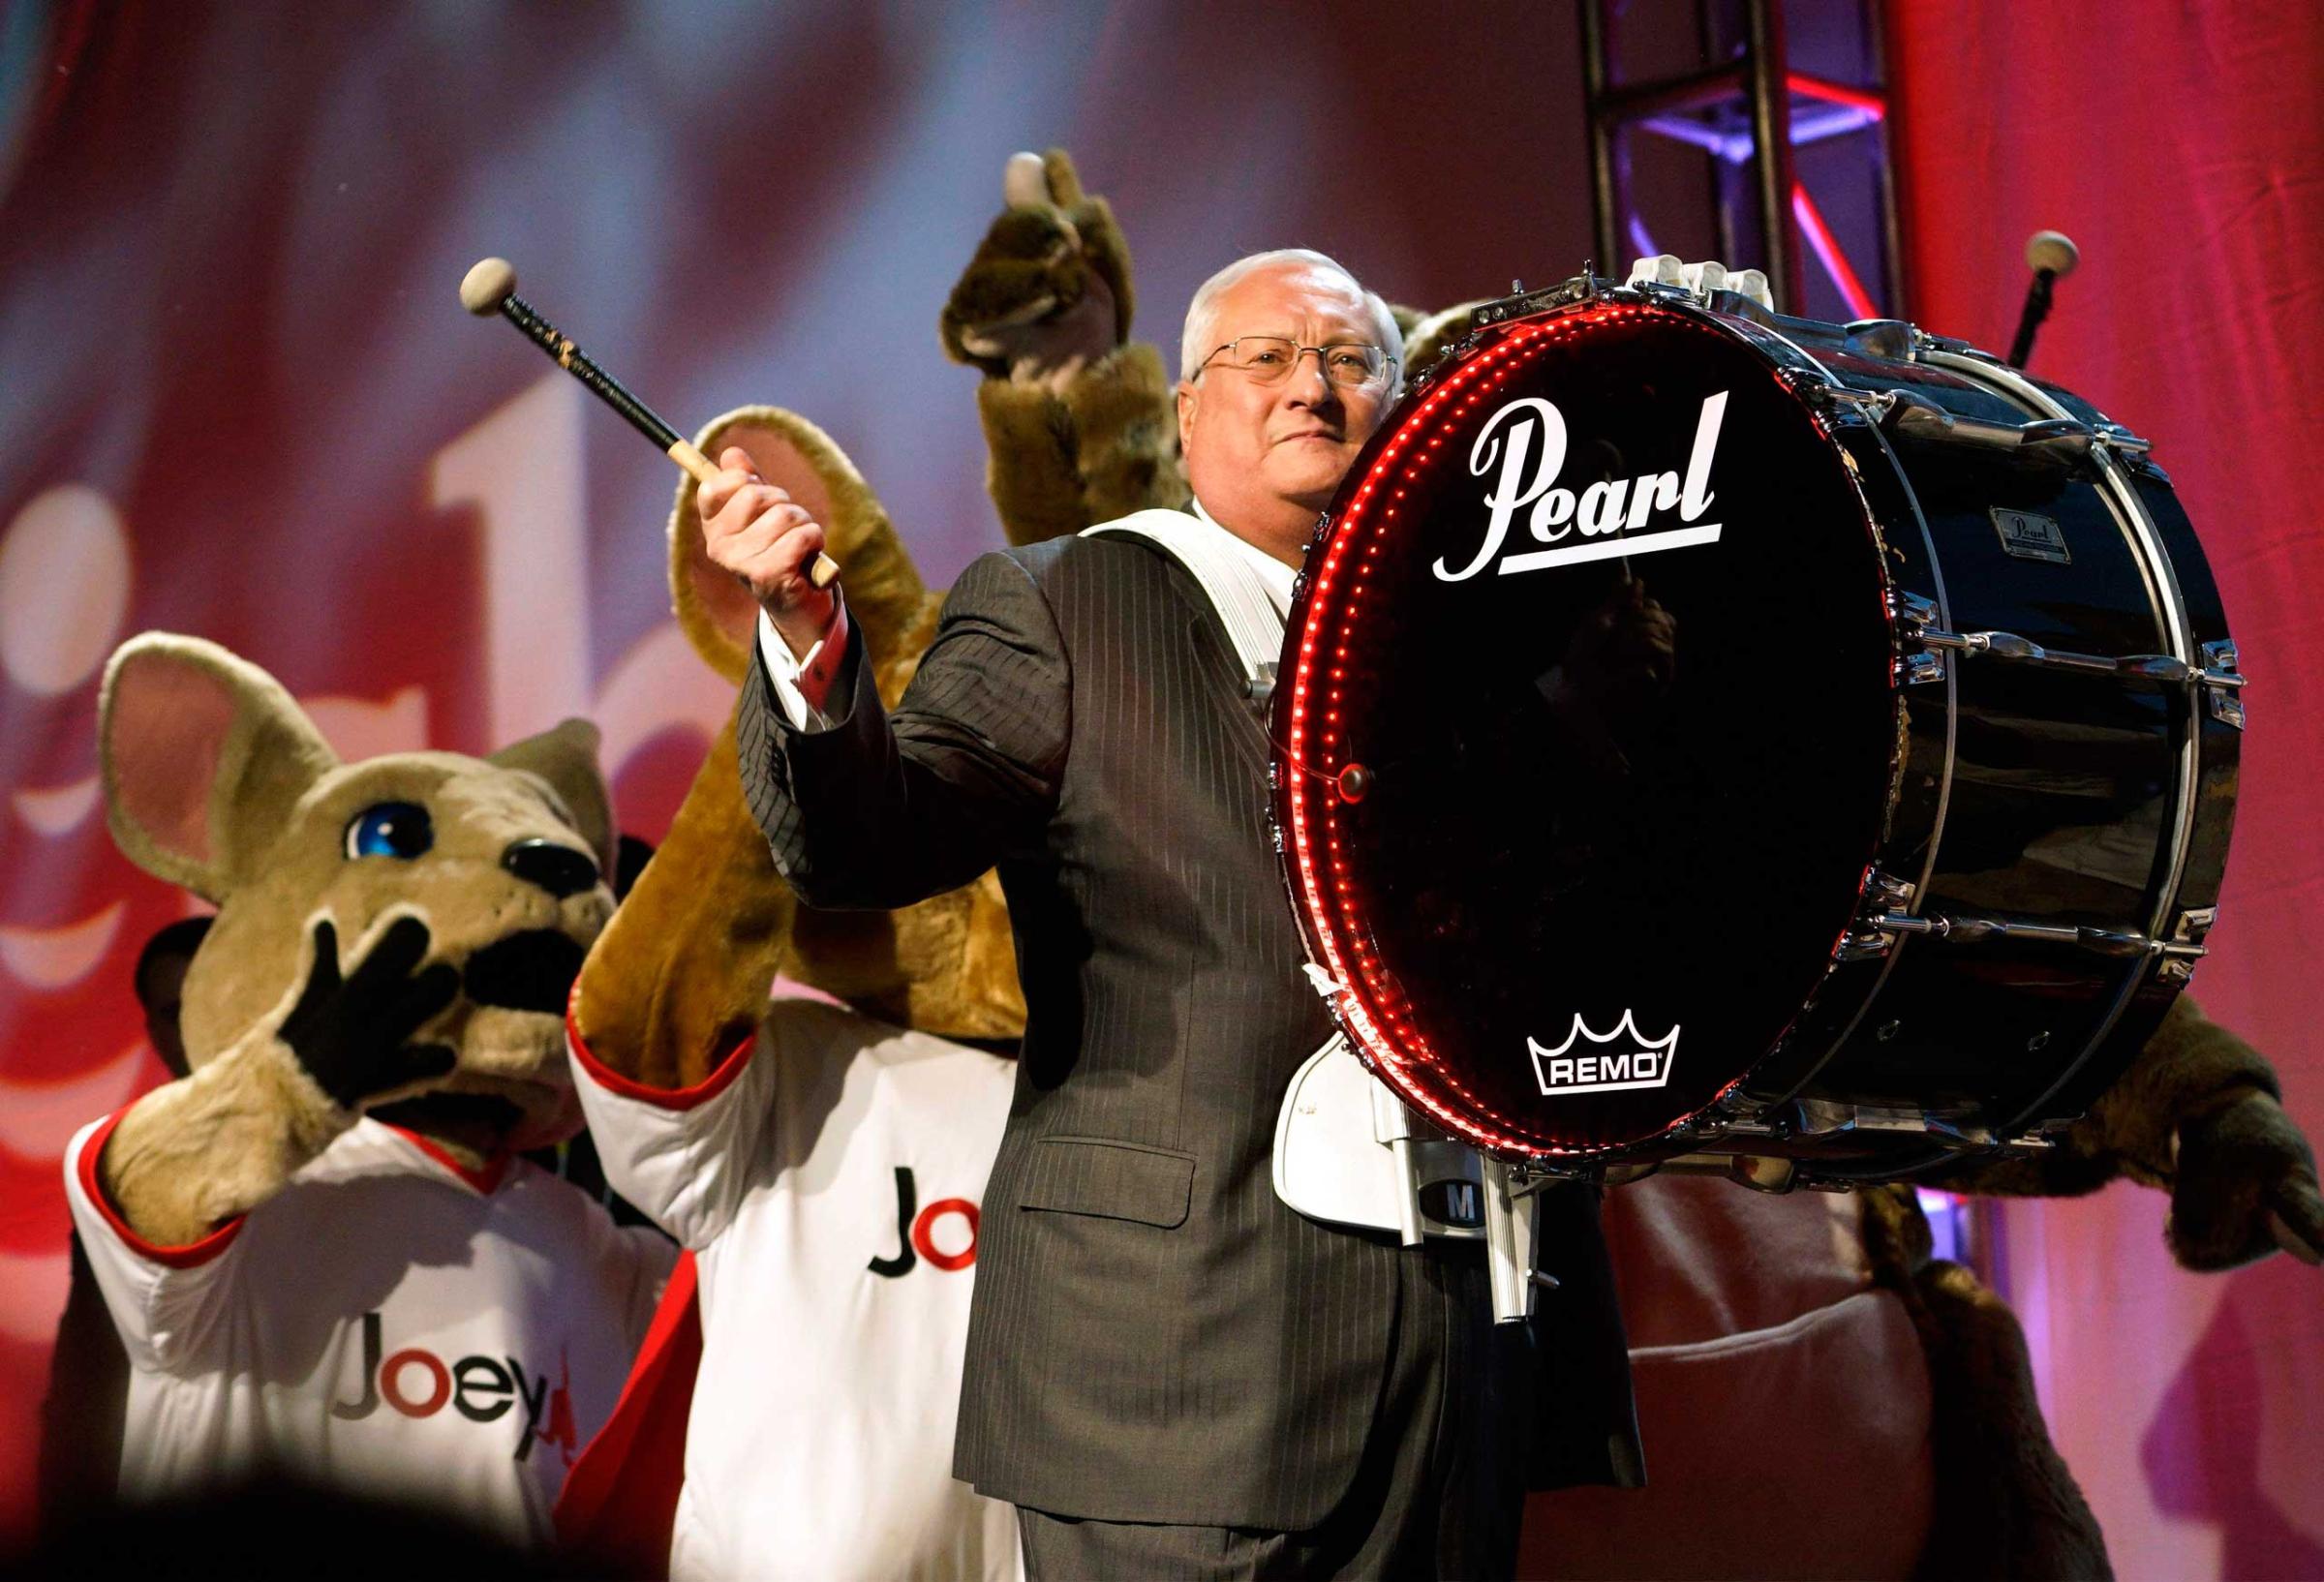 Joe Clayton, CEO of Dish, arrives on stage banging a bass drum followed by company mascots during the Dish news conference at the International Consumer Electronics show (CES) in Las Vegas on Jan. 5, 2015.